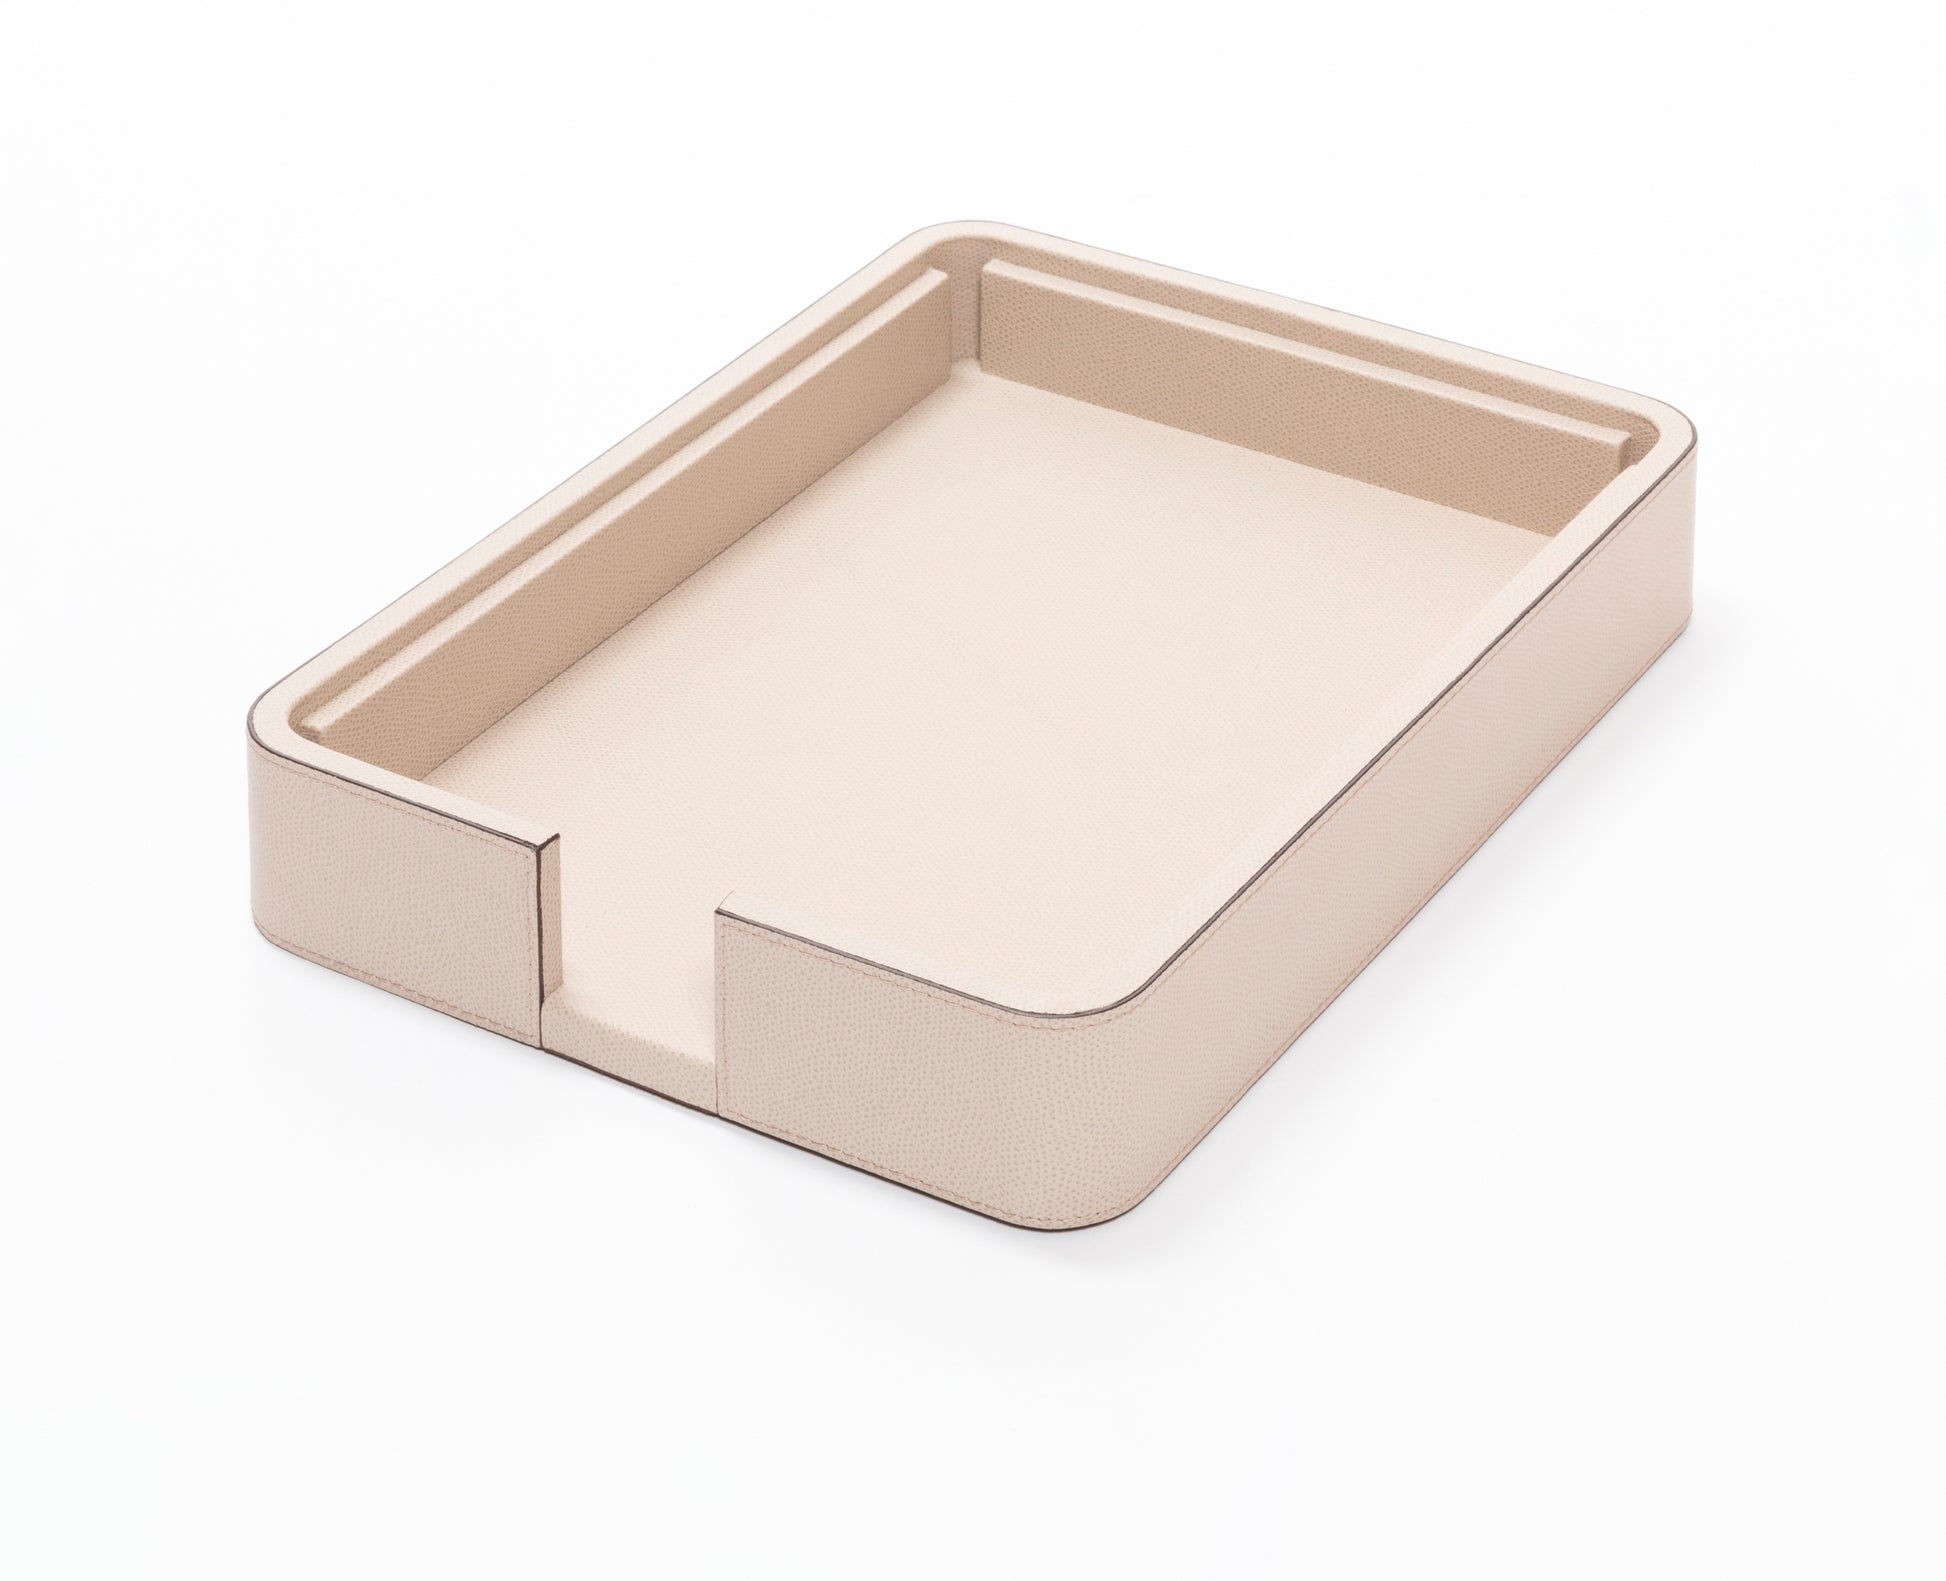 Giobagnara Polo A4 Paper Tray | 2Jour Concierge, #1 luxury high-end gift & lifestyle shop